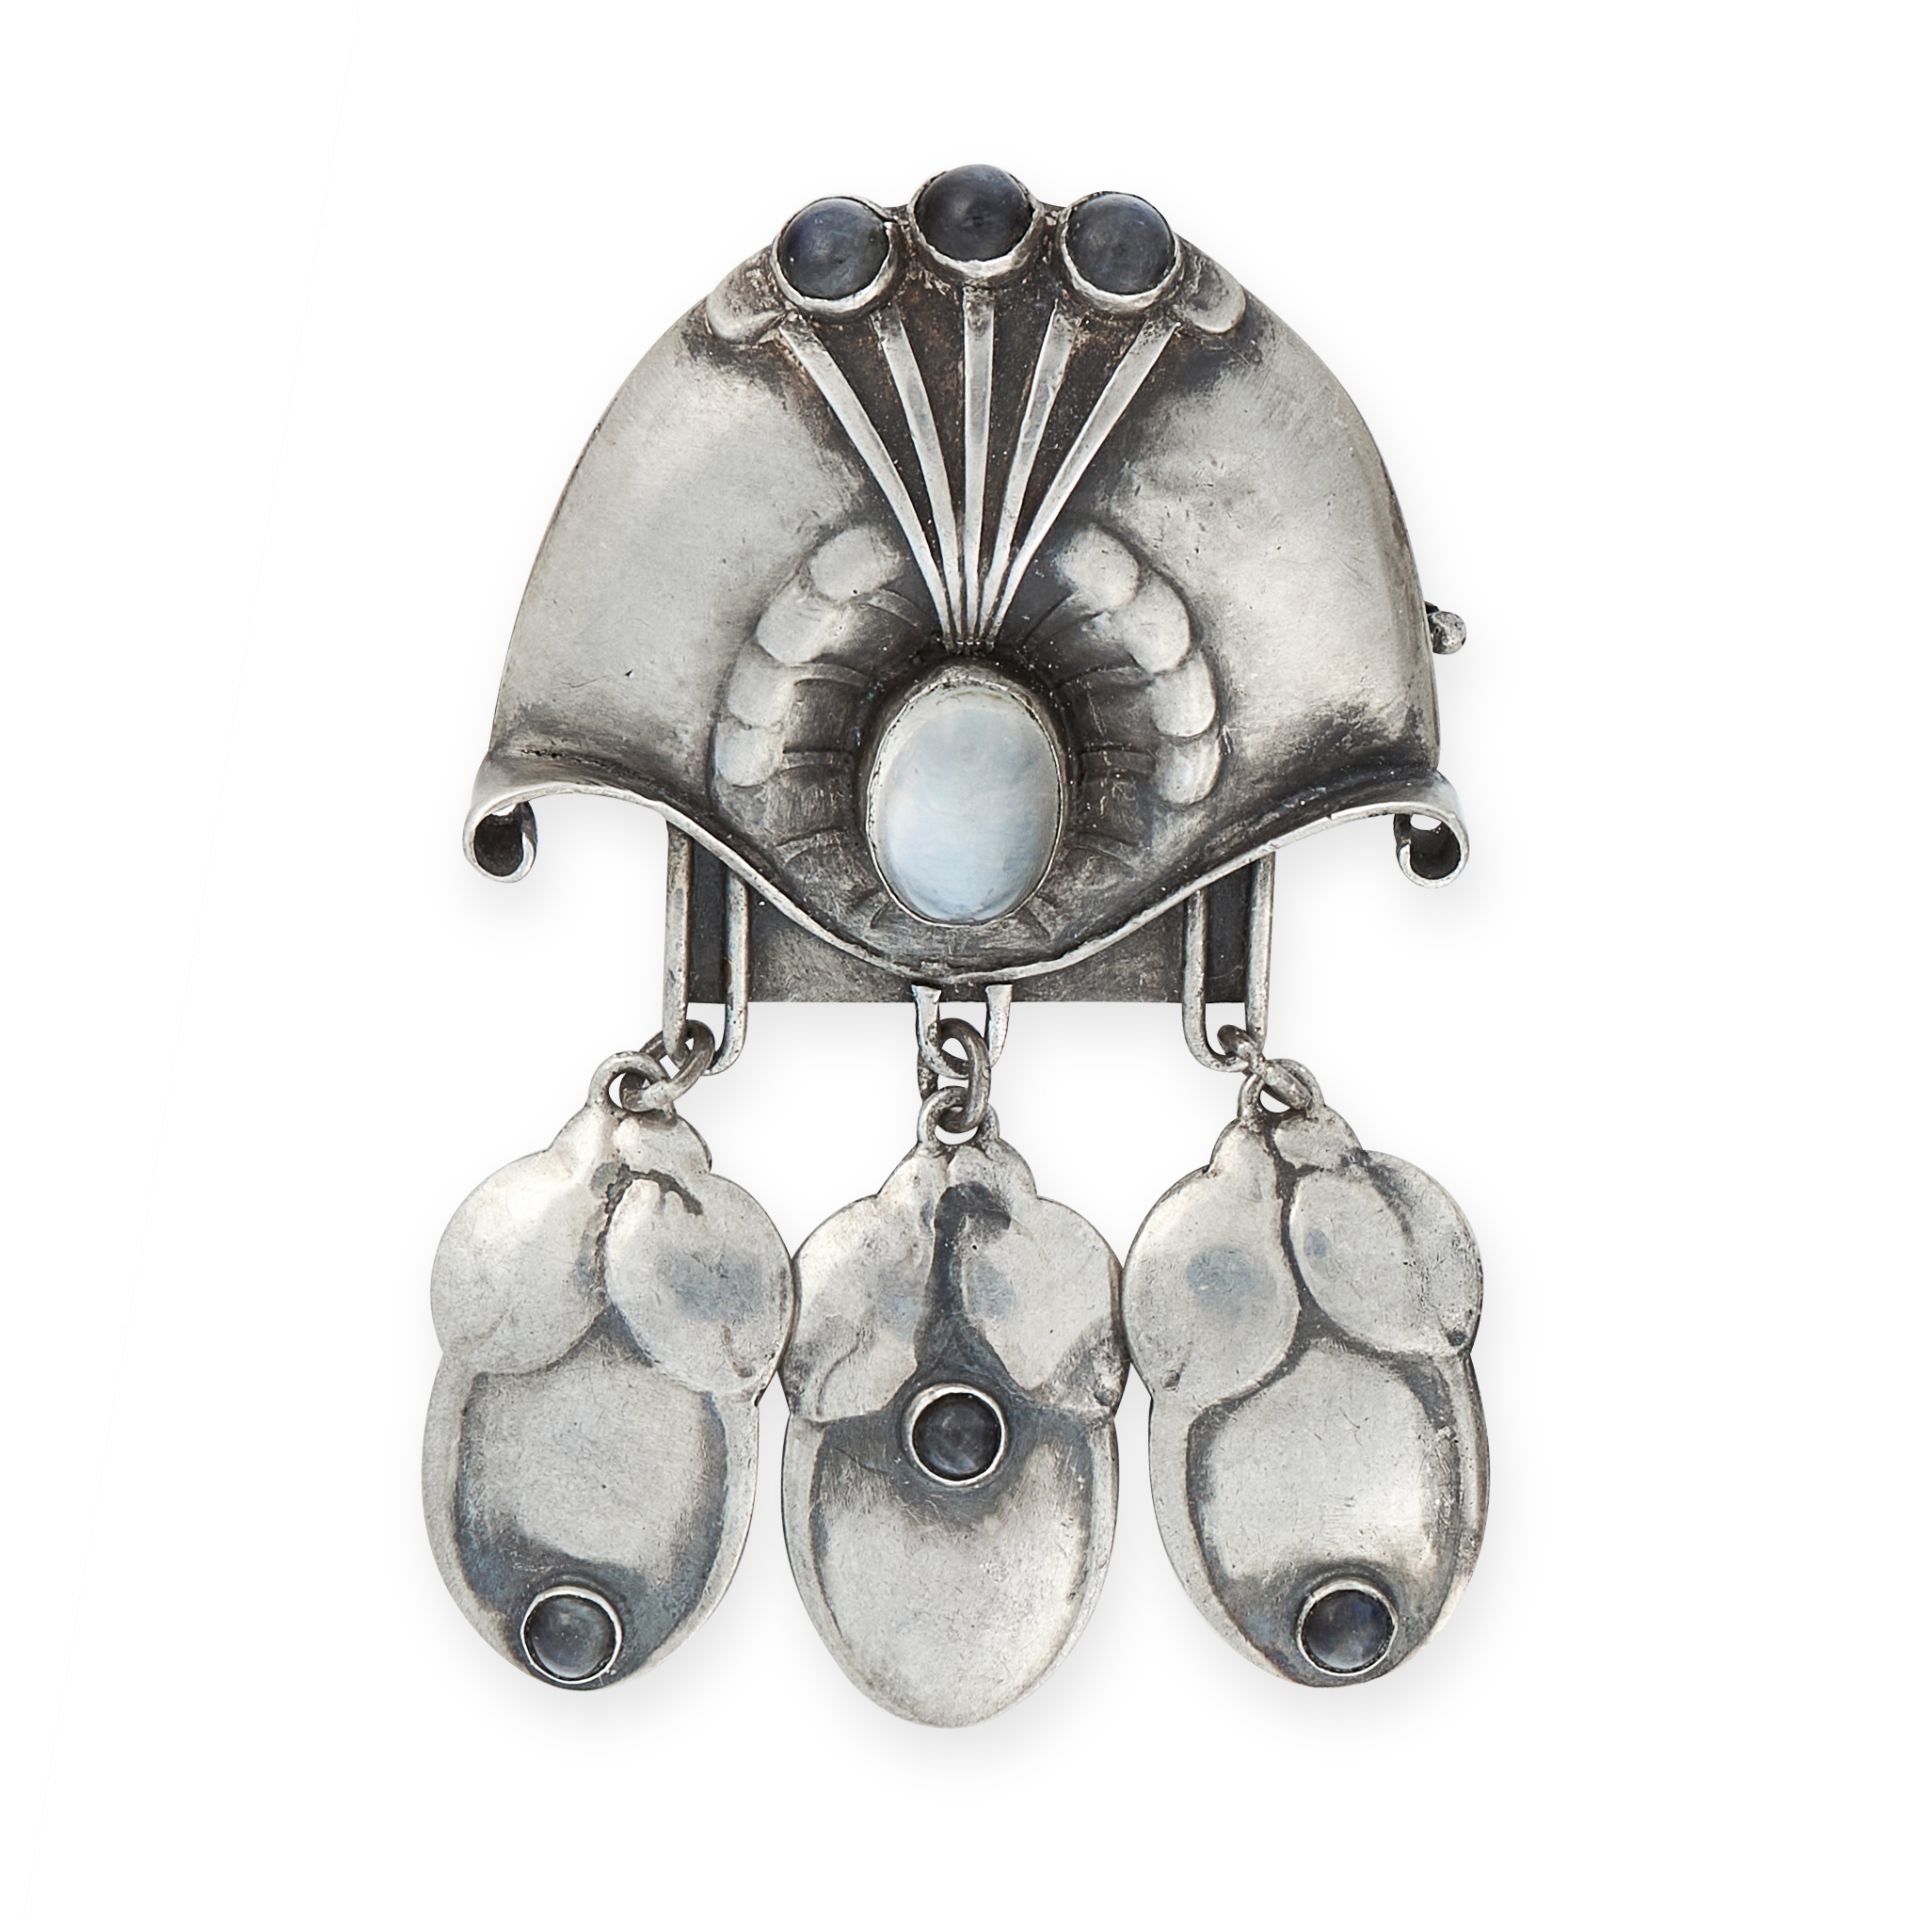 A MOONSTONE AND LABRADORITE BROOCH, GEORG JENSEN CIRCA 1920 in silver, design number 153, the styled